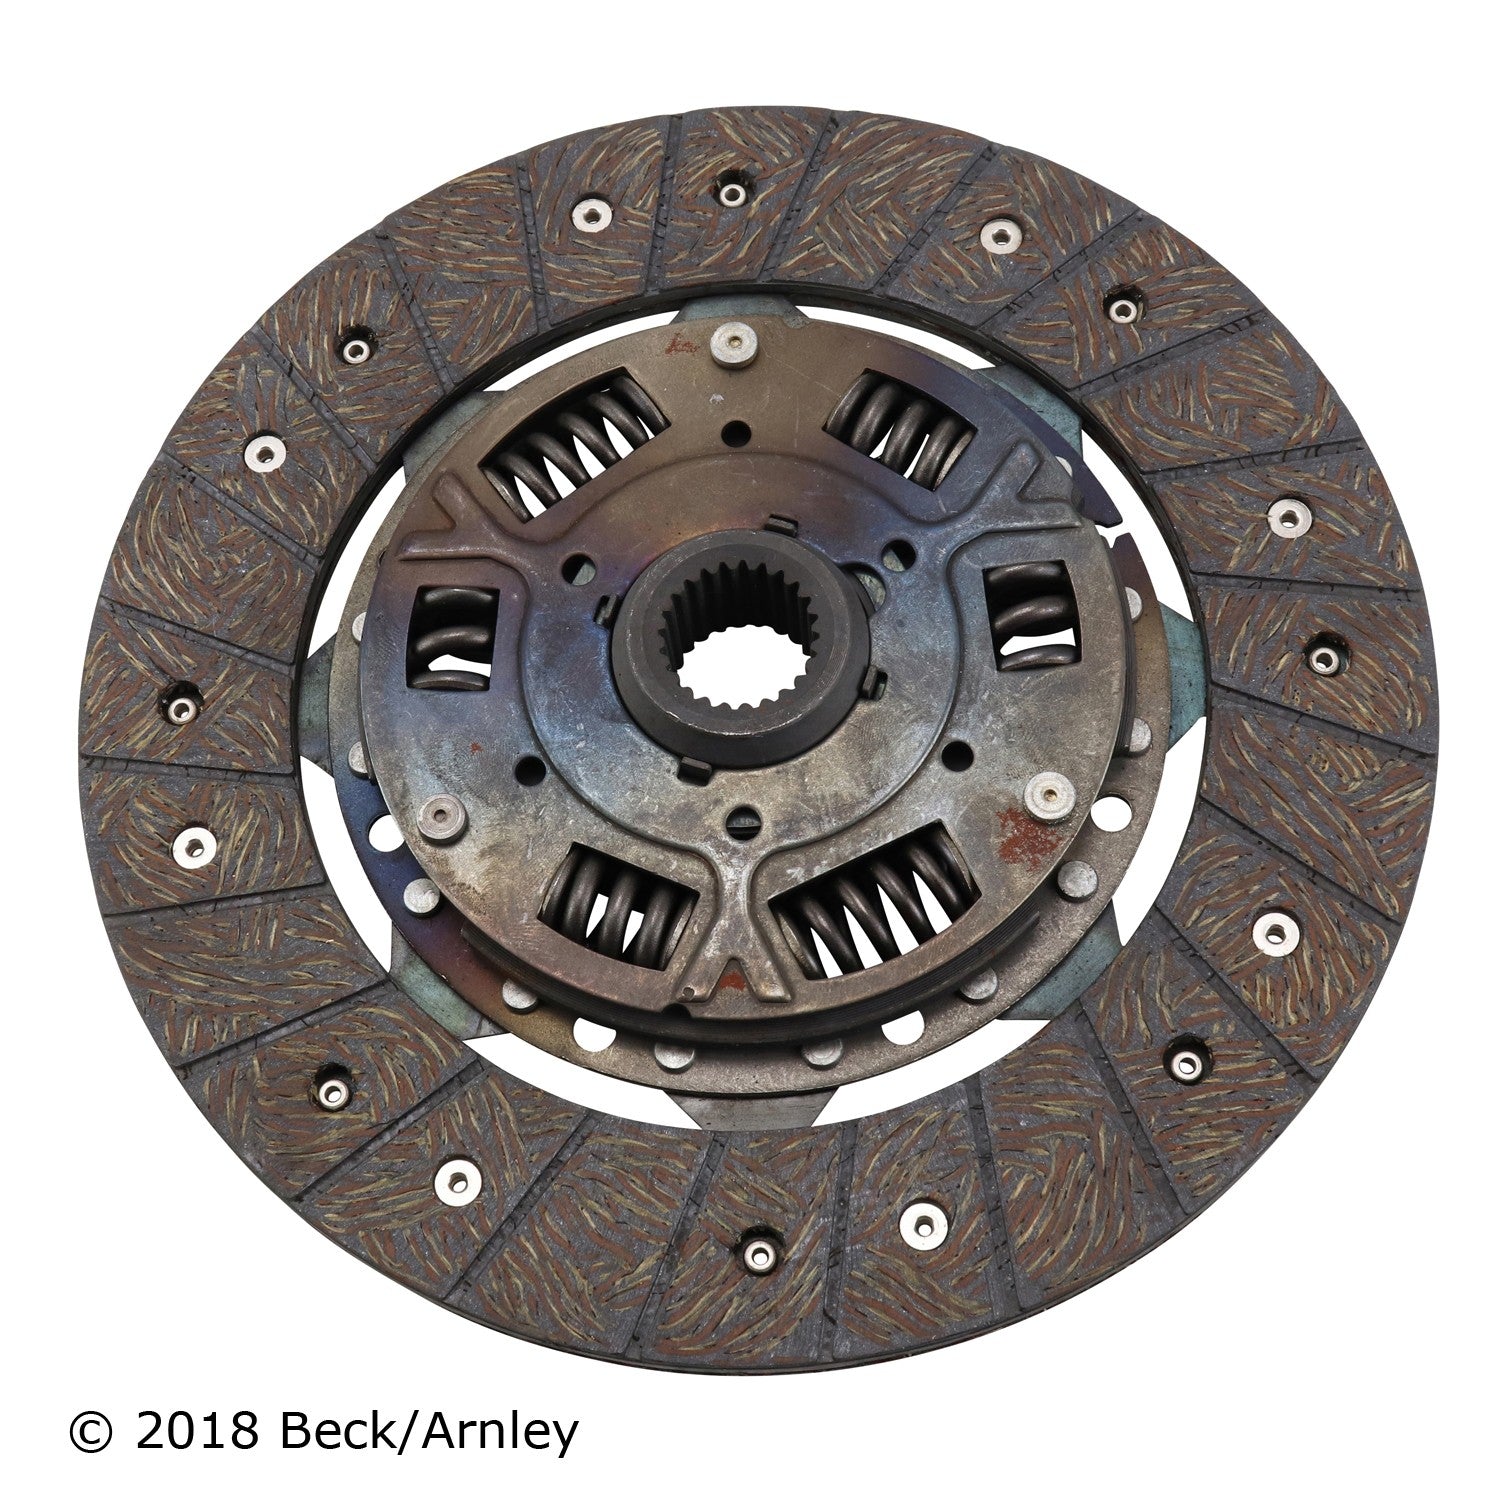 Beck Arnley 061-9250  Clutch Kit for 1993-2001 Nissan Altima FWD L4 2.4L